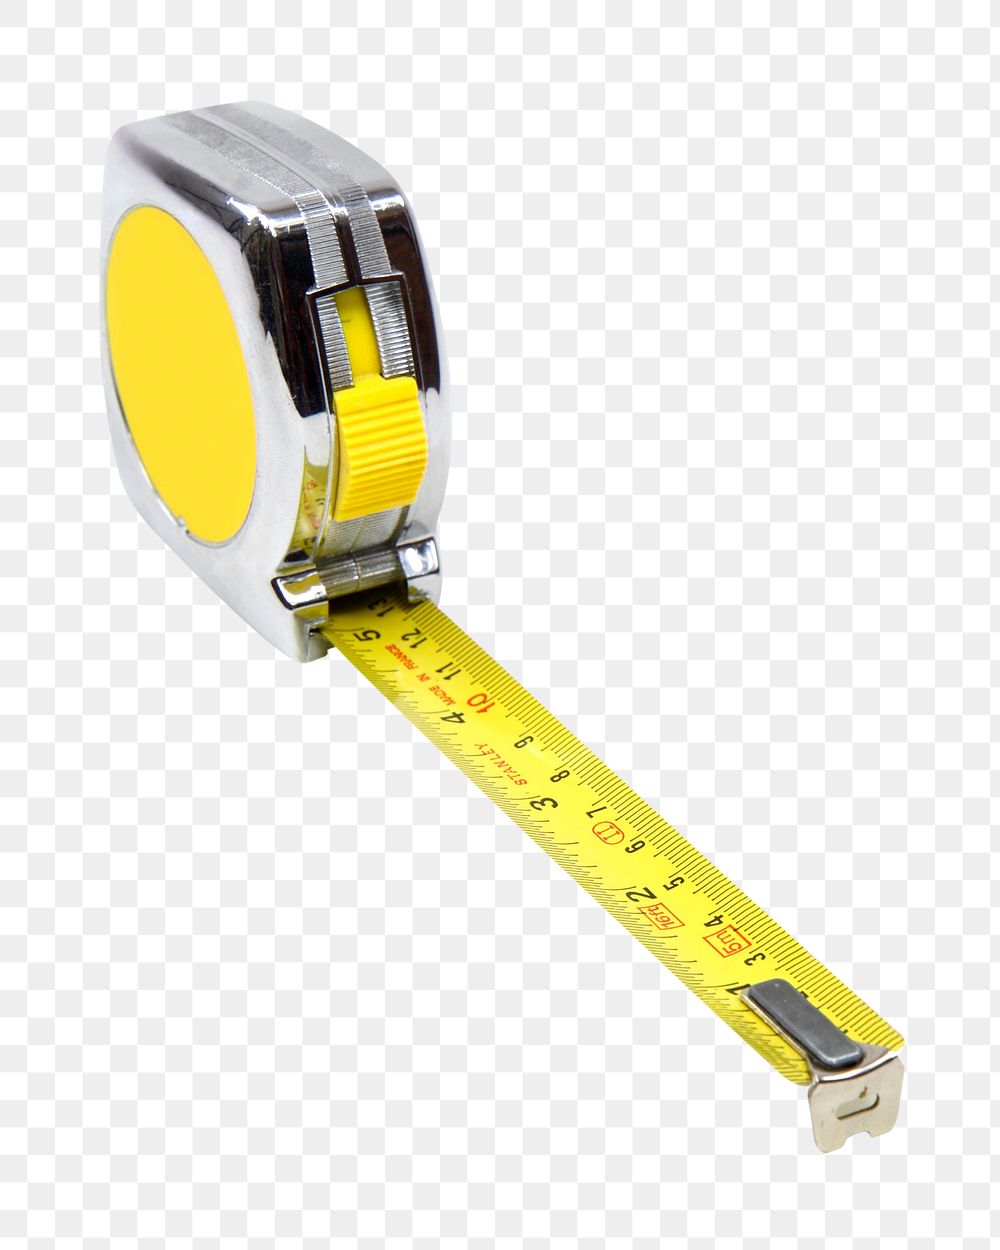 Tape measure png sticker, tool image on transparent background